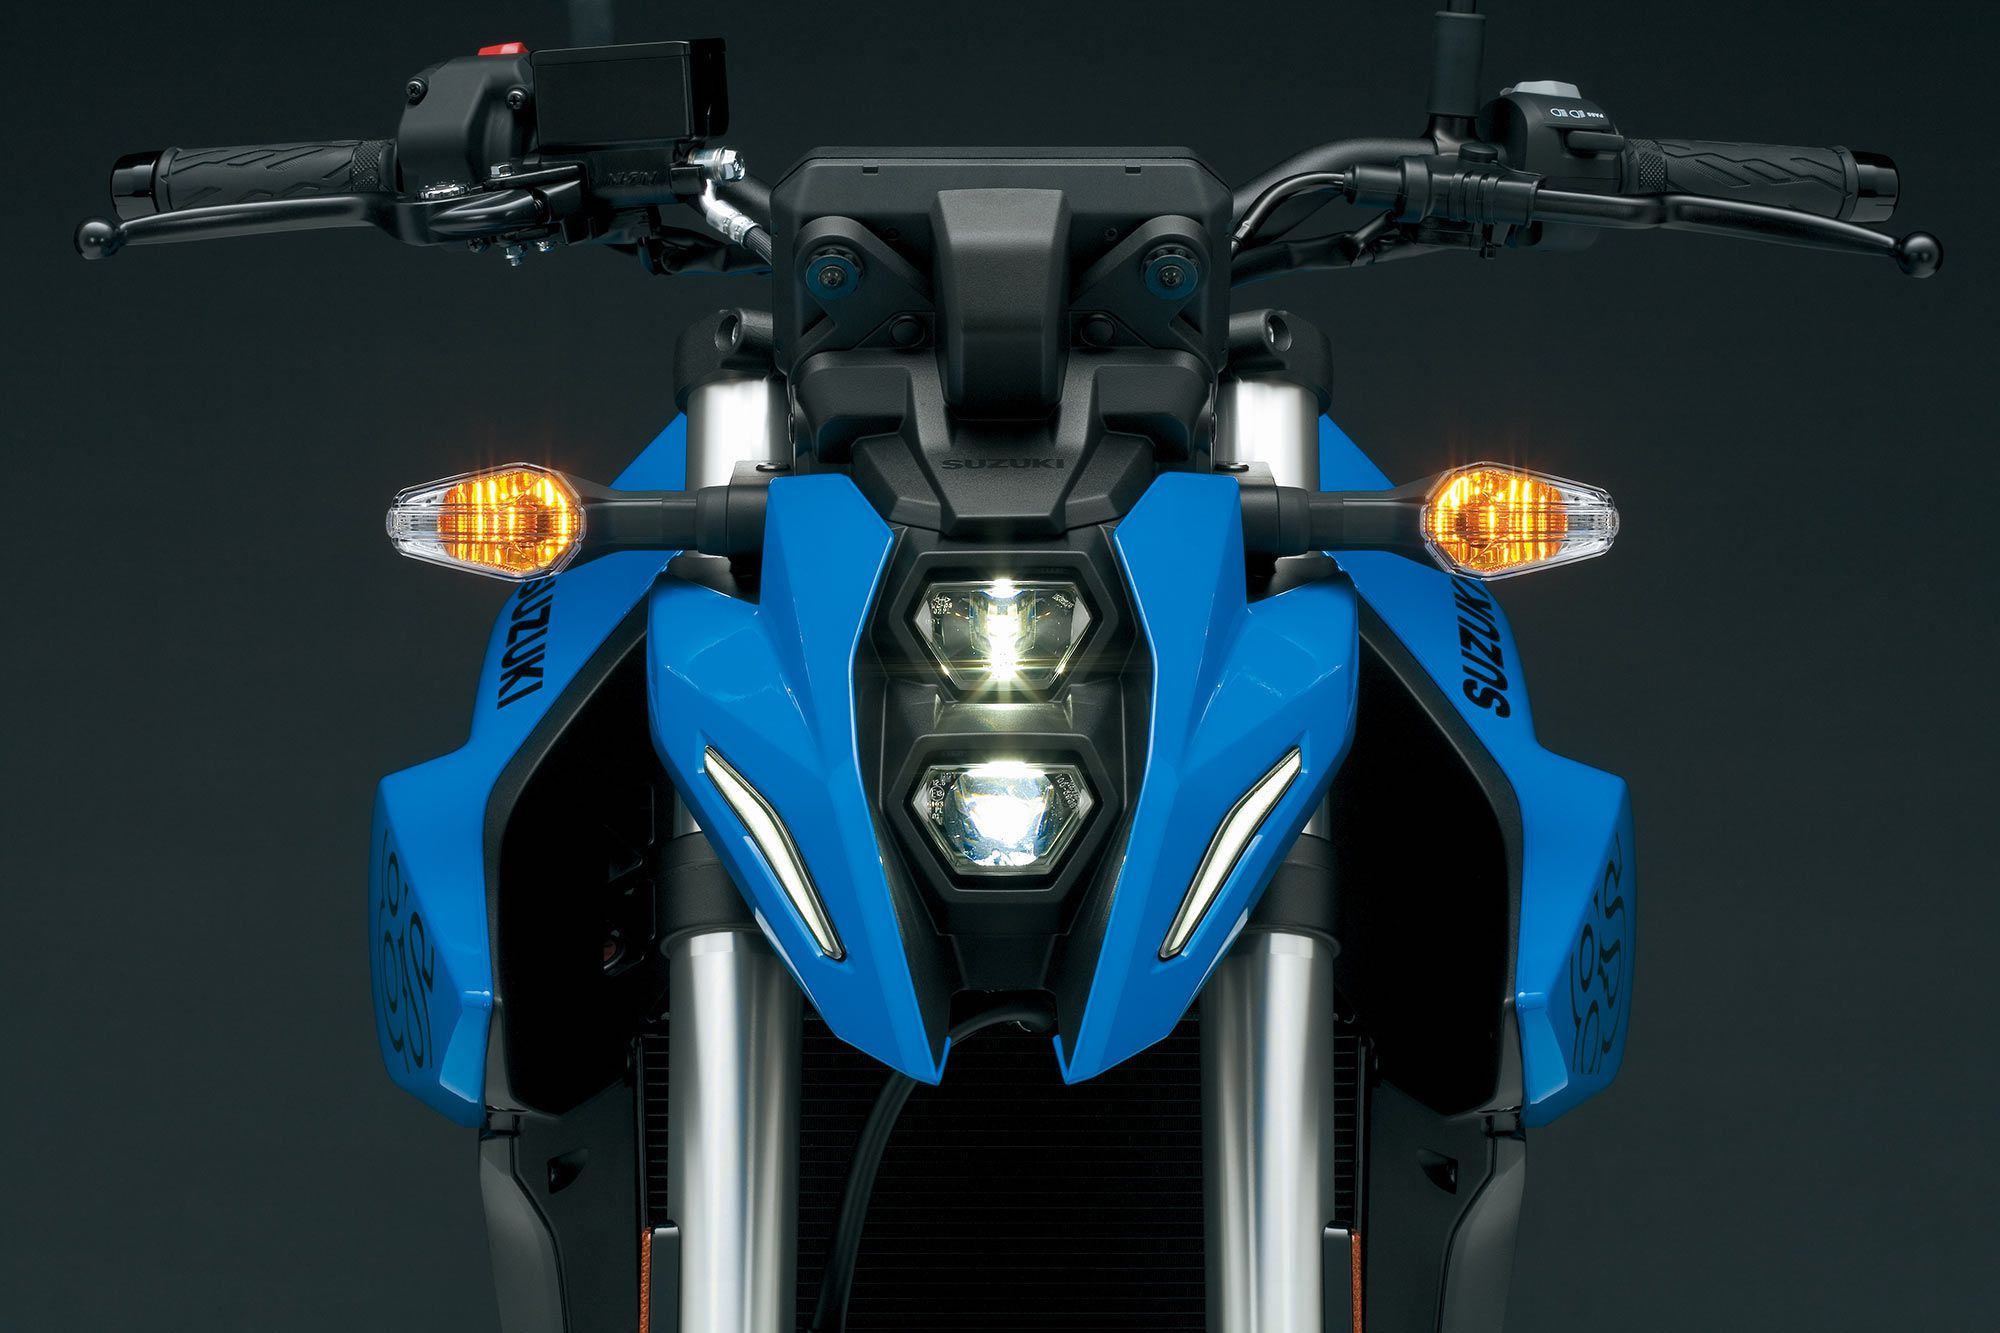 Meet the newest addition to Suzuki’s GSX line: The GSX-8S. Media sourced from CycleWorld.